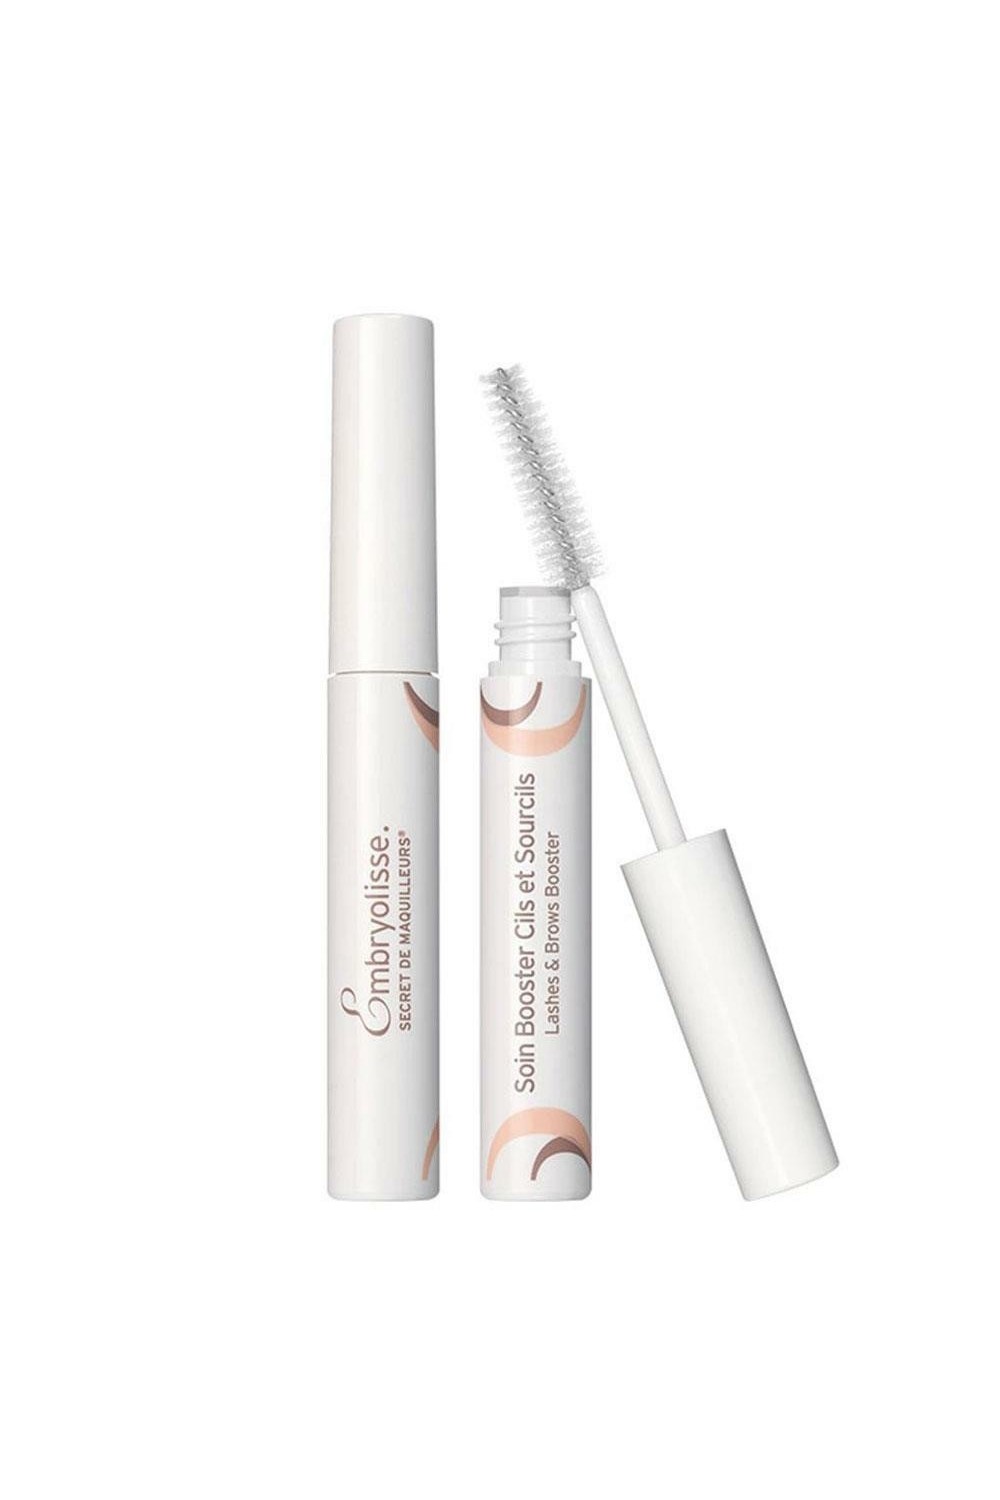 Embryolisse Lash and Brow Booster Care